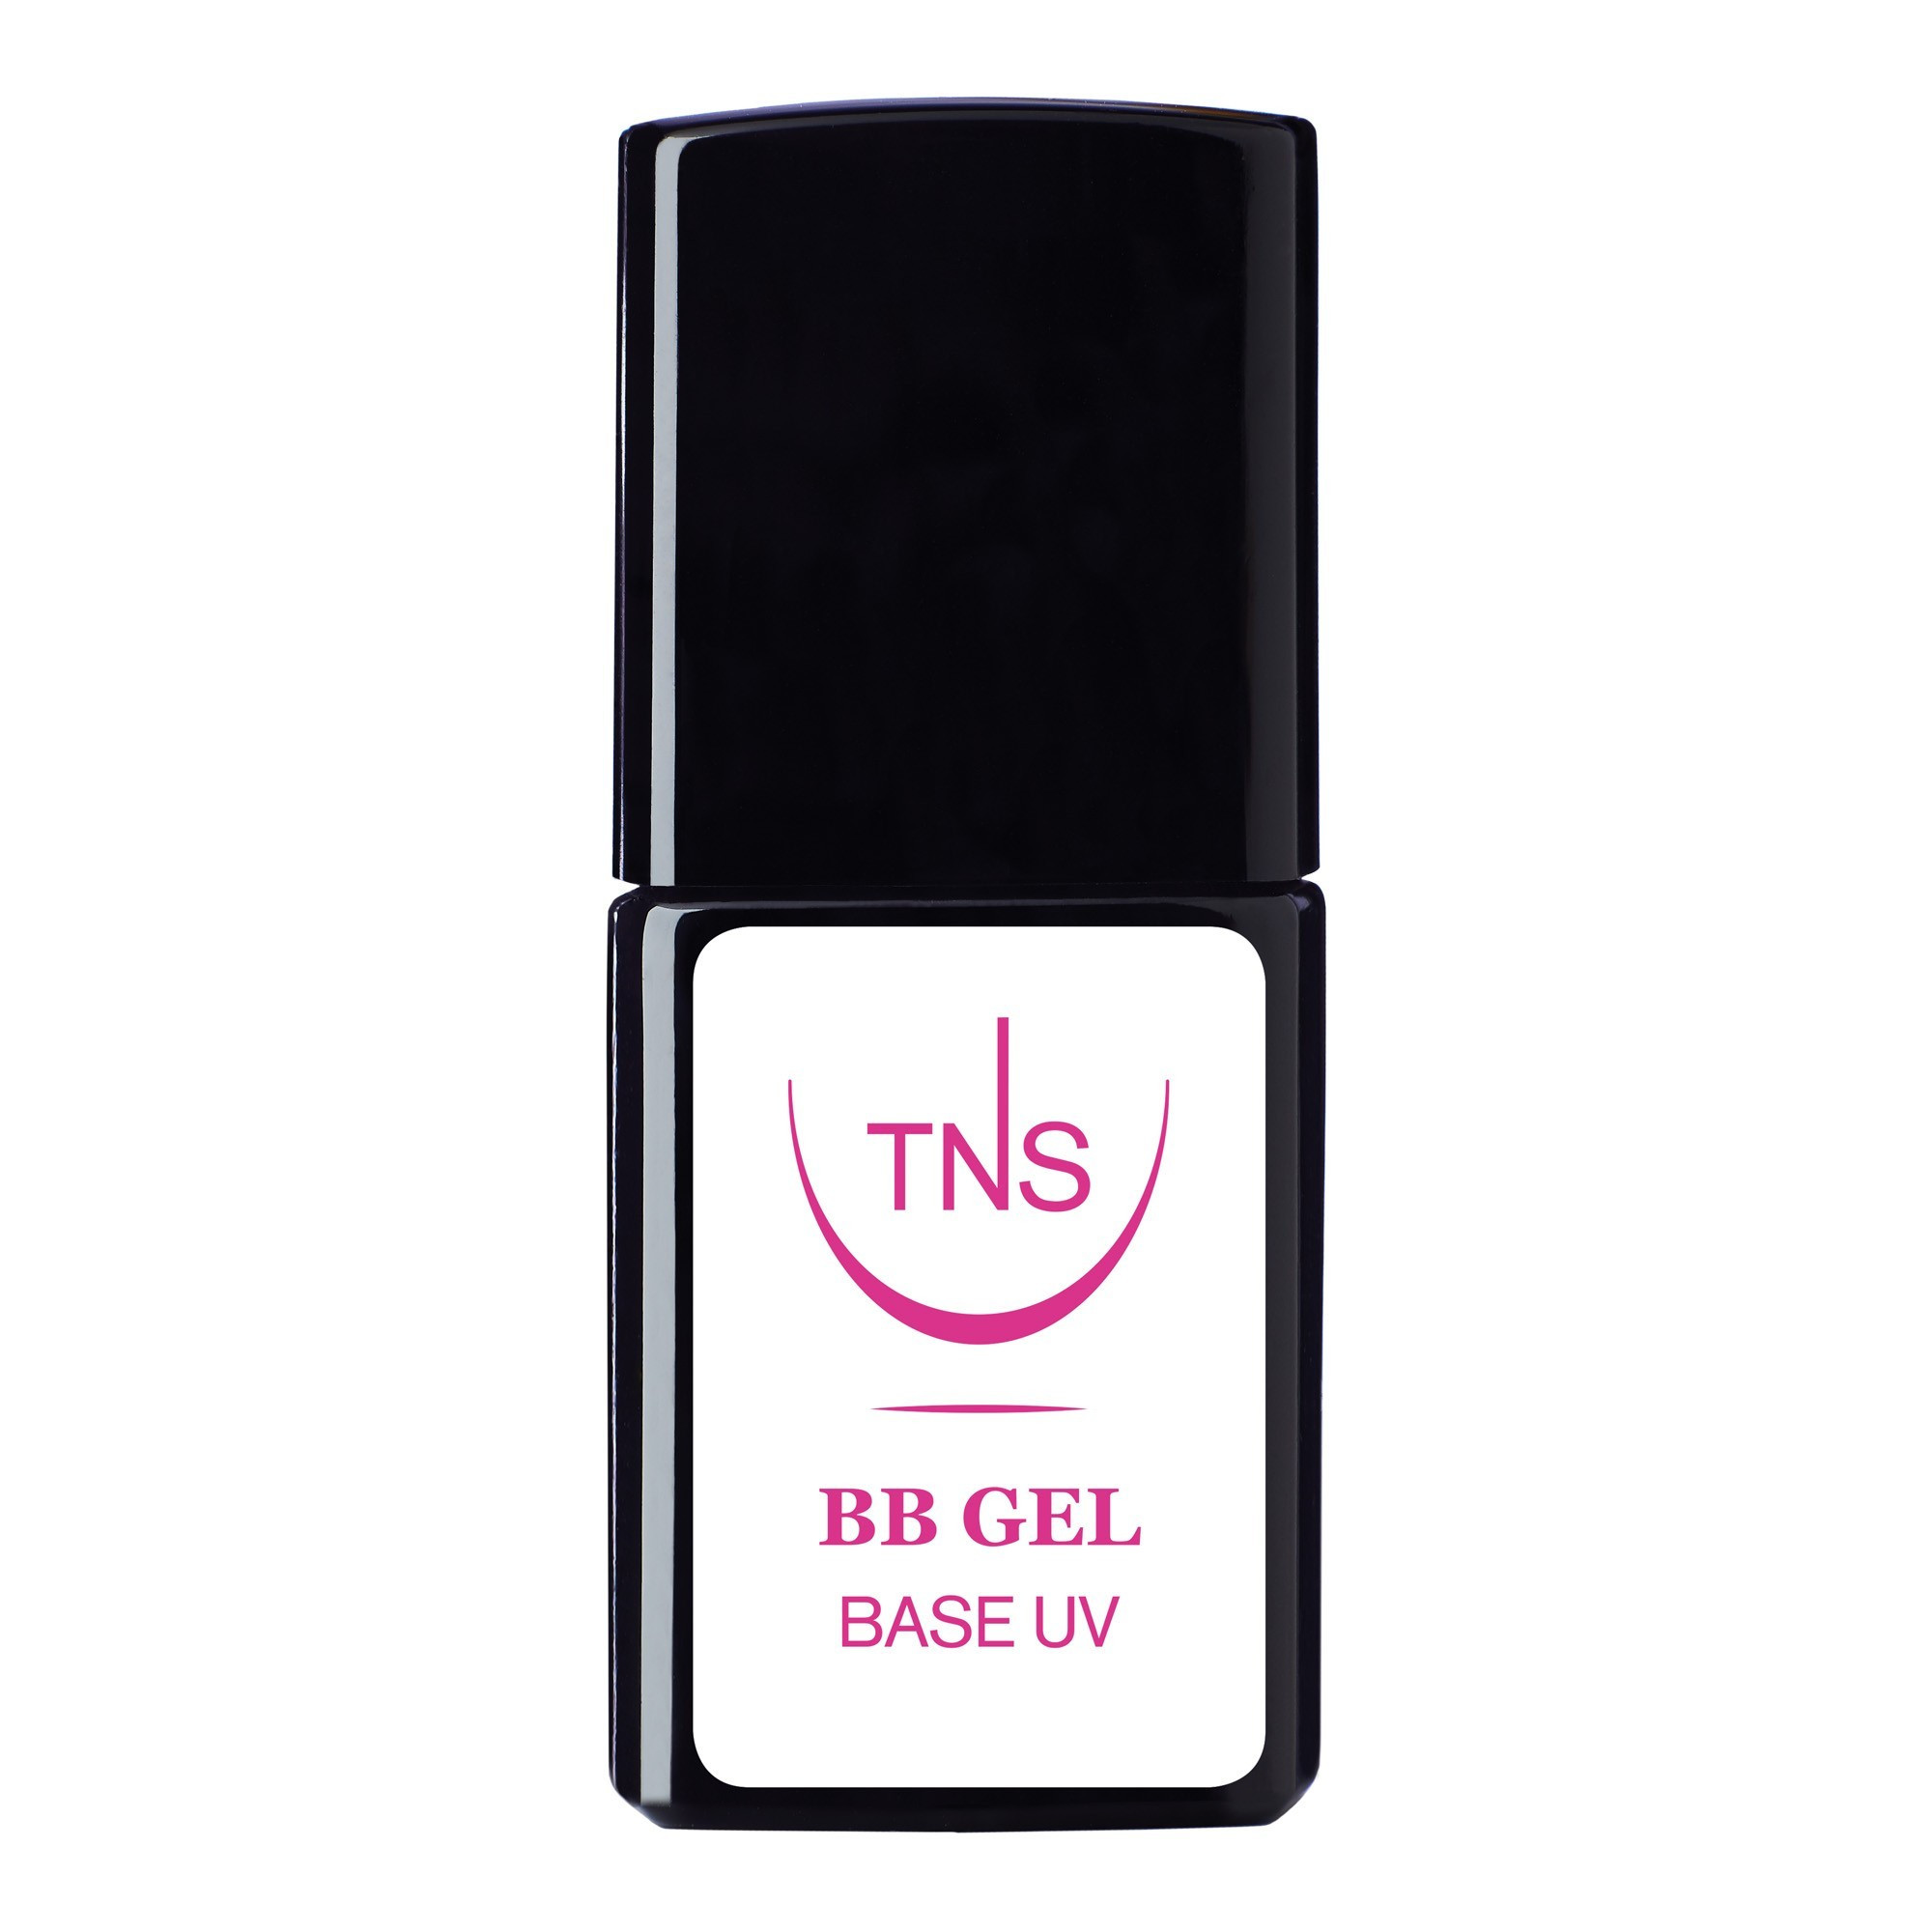 TNS System Kits for nails: Flash, Defender, Laqerìs, BB Gel and Powerled Lamp